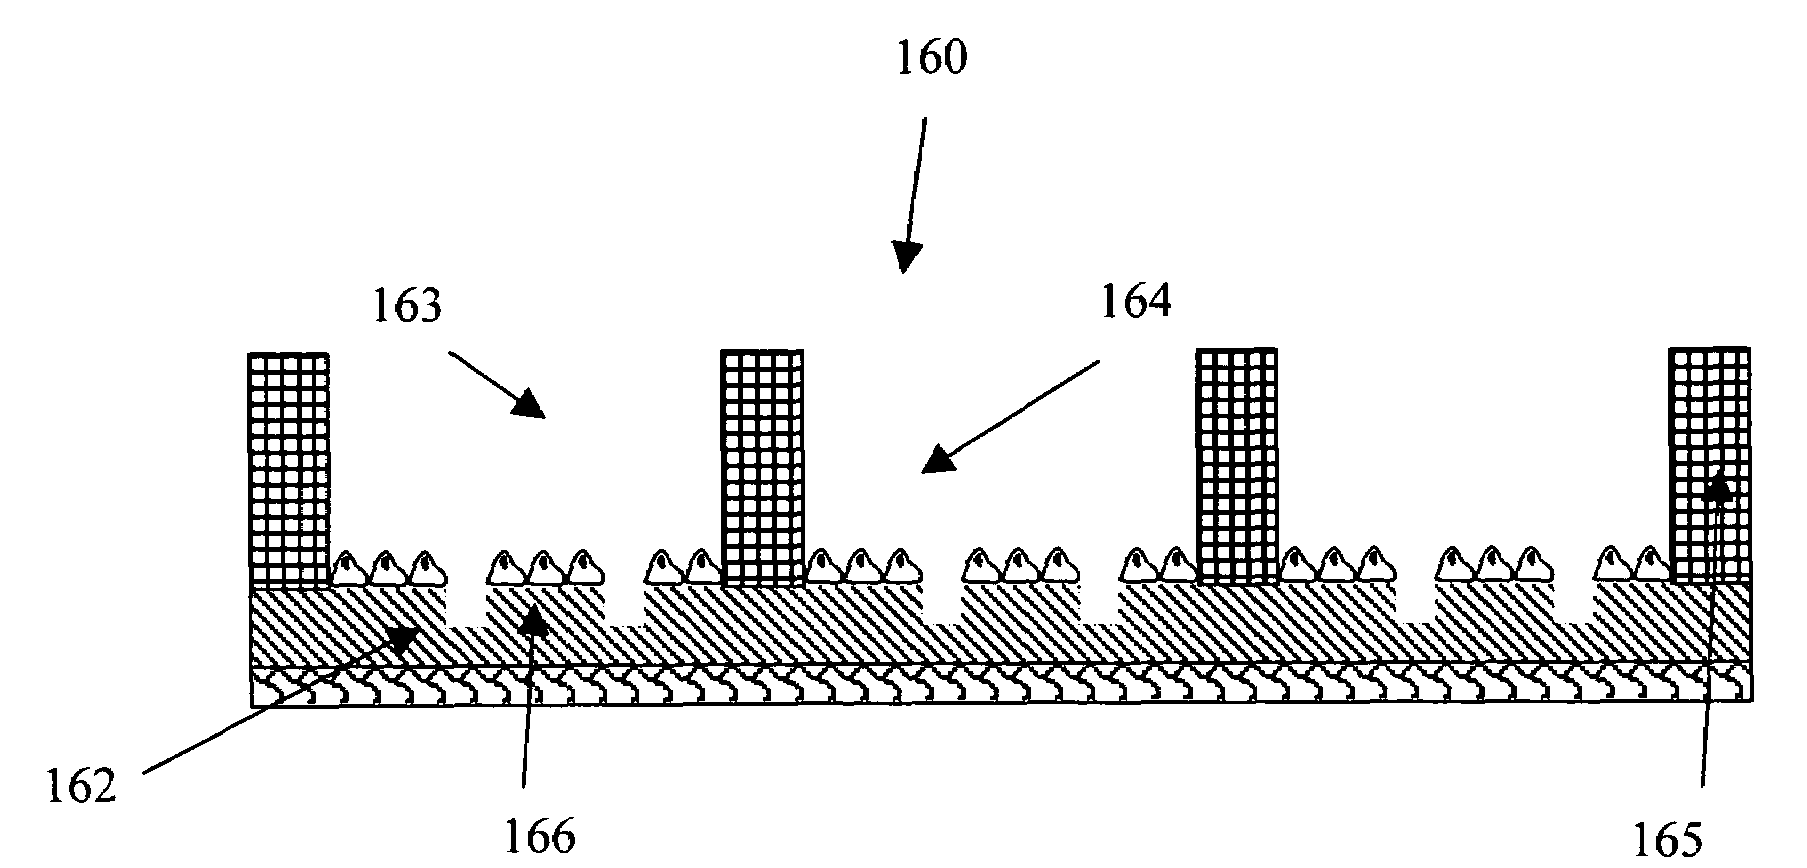 Micro-pattern embedded plastic optical film device for cell-based assays